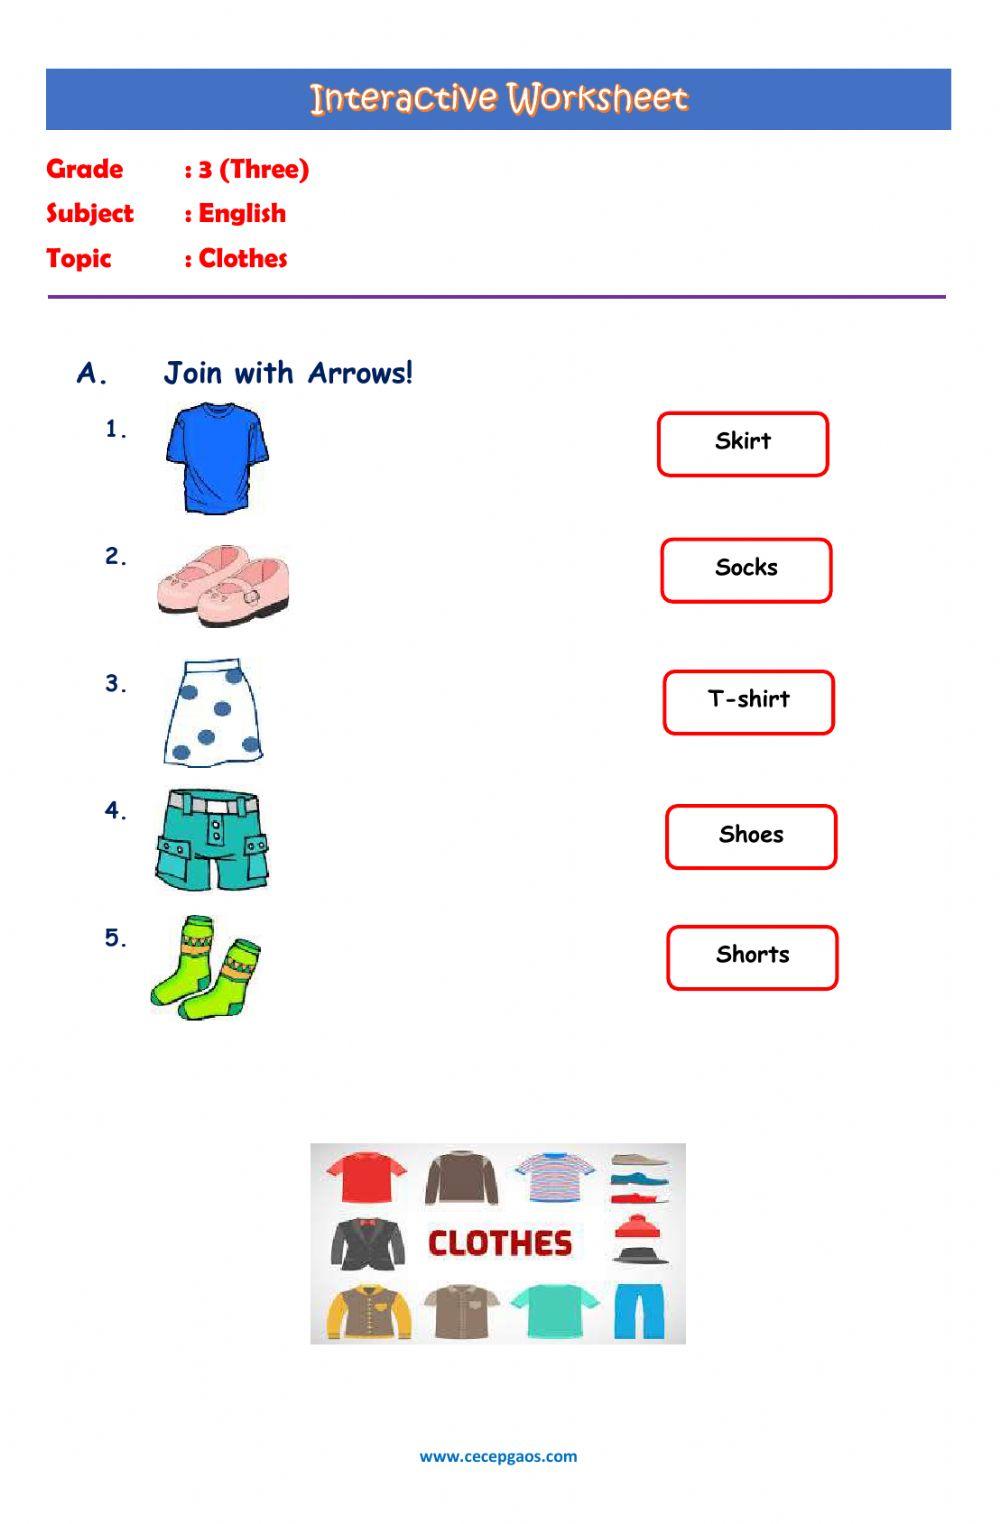 English Interactive Worksheet about Clothes